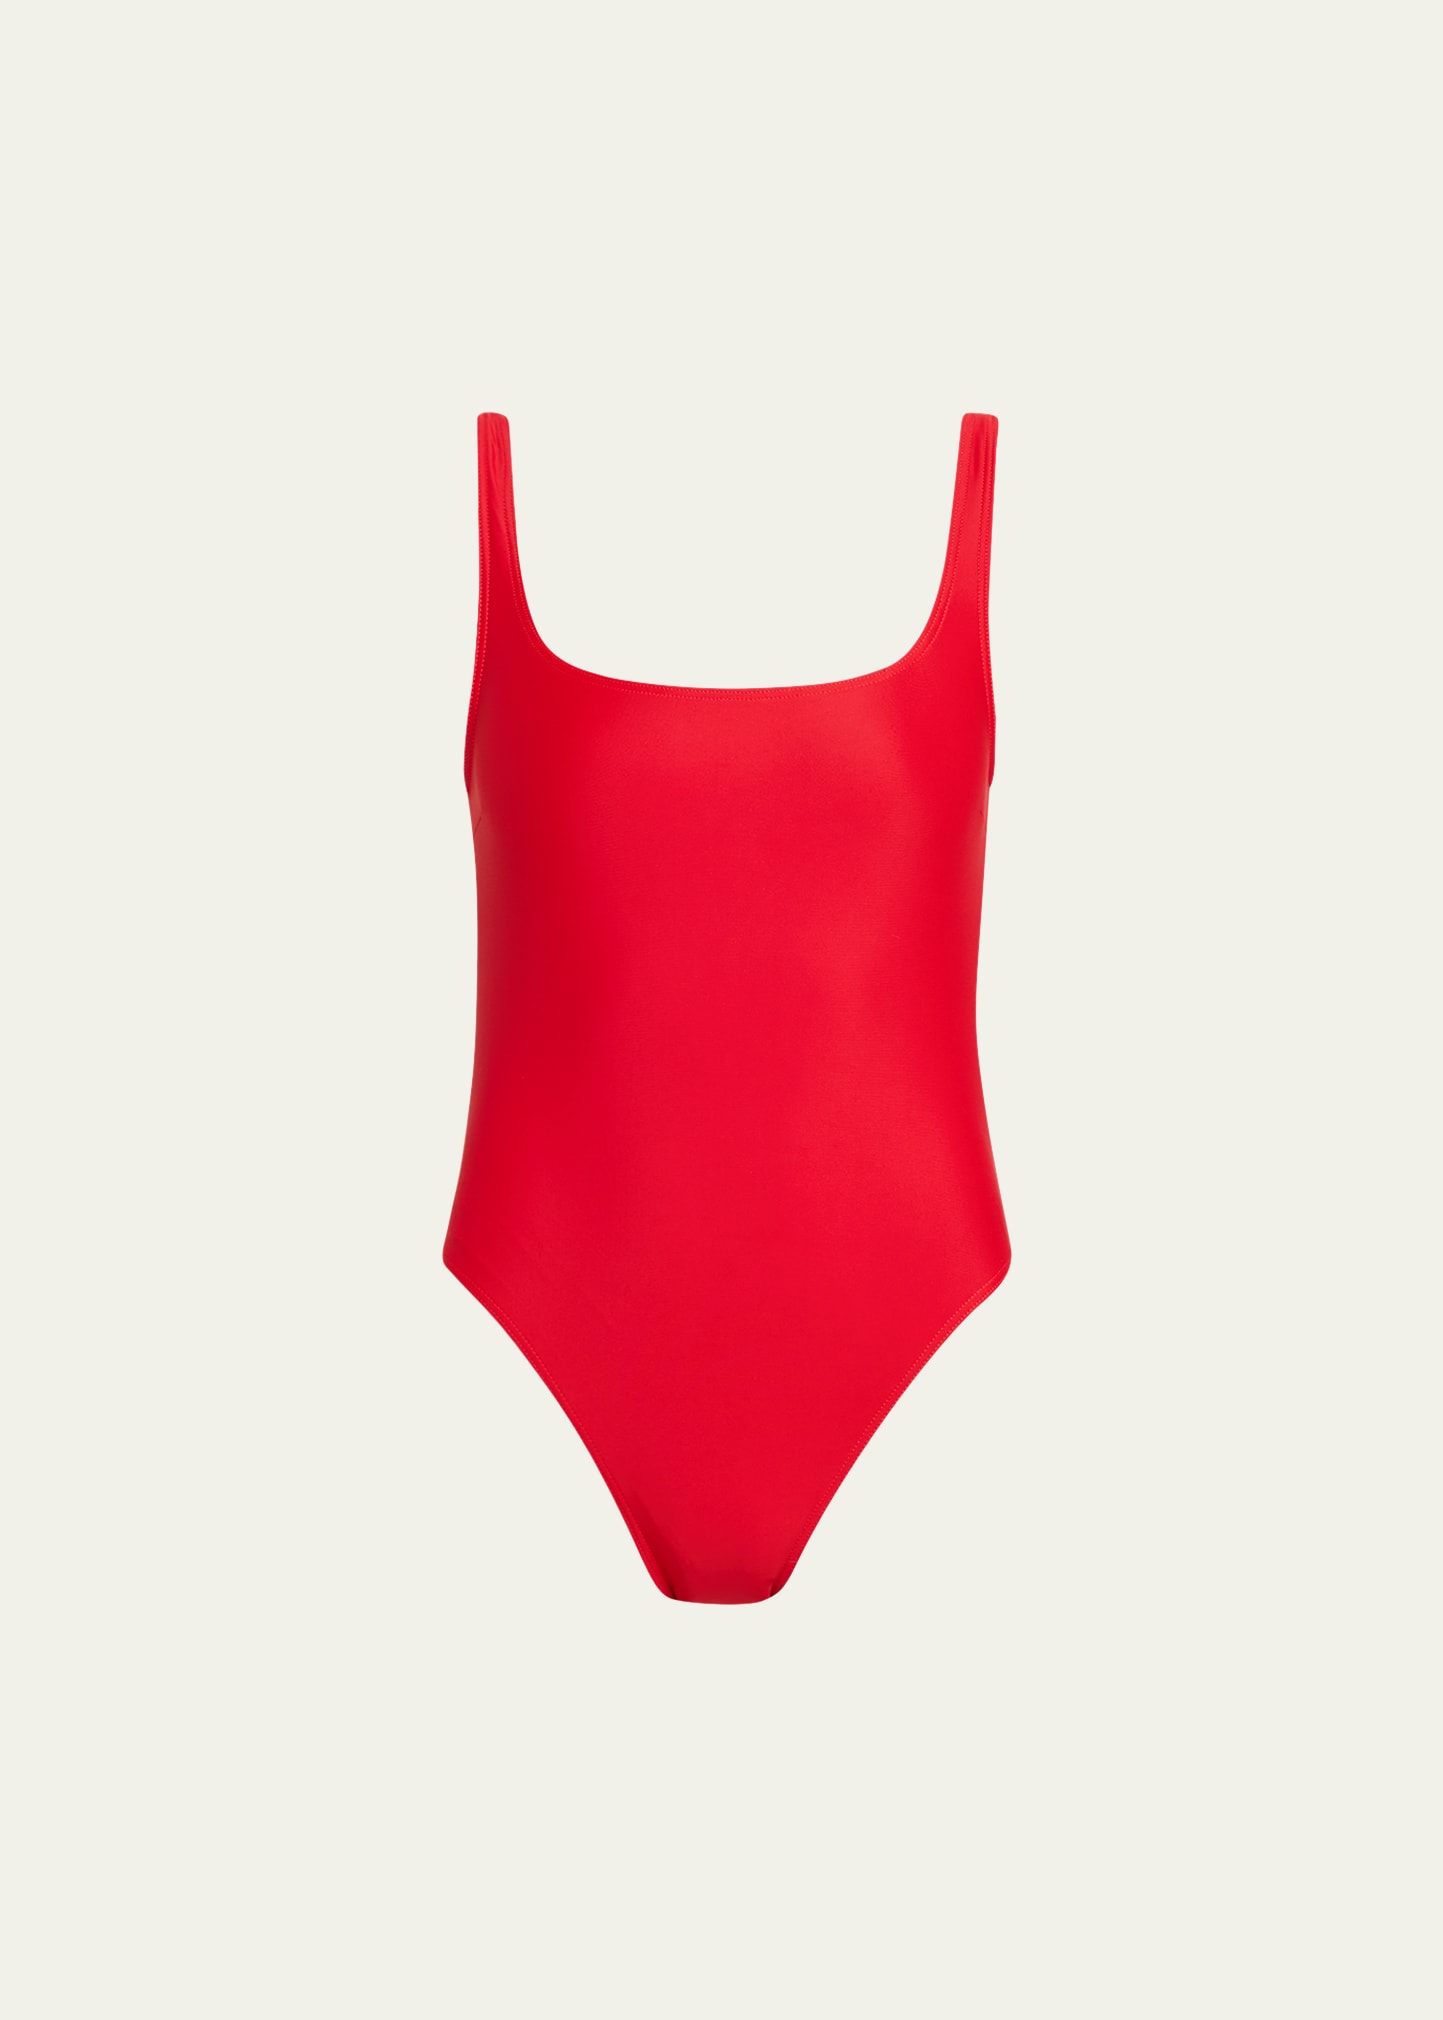 Matteau Nineties Maillot In Rosso